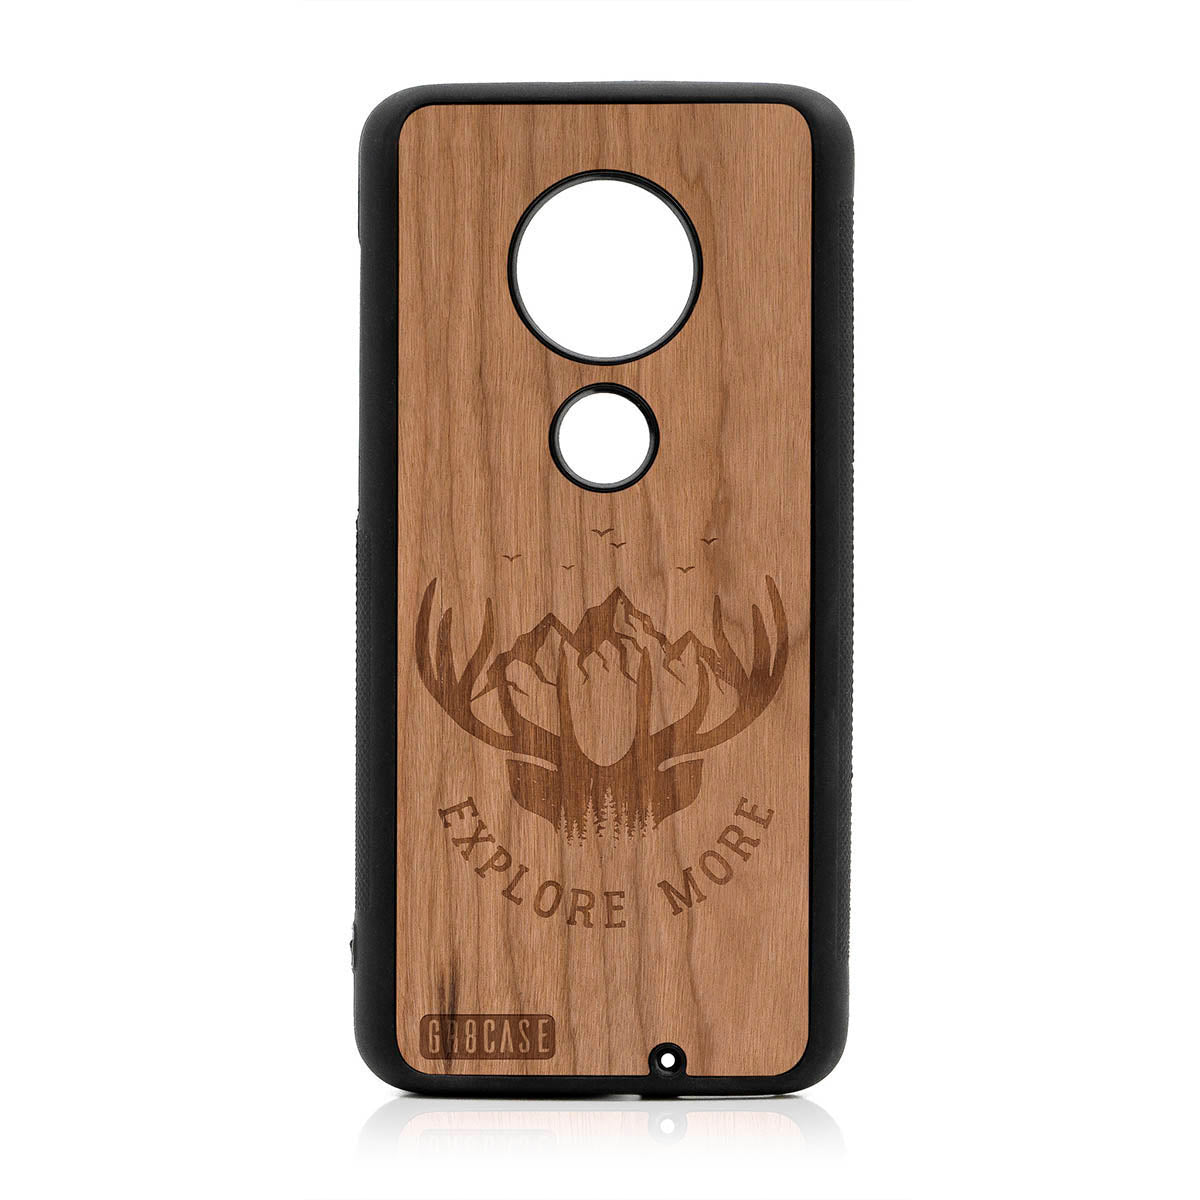 Explore More (Forest, Mountains & Antlers) Design Wood Case For Moto G7 Plus by GR8CASE